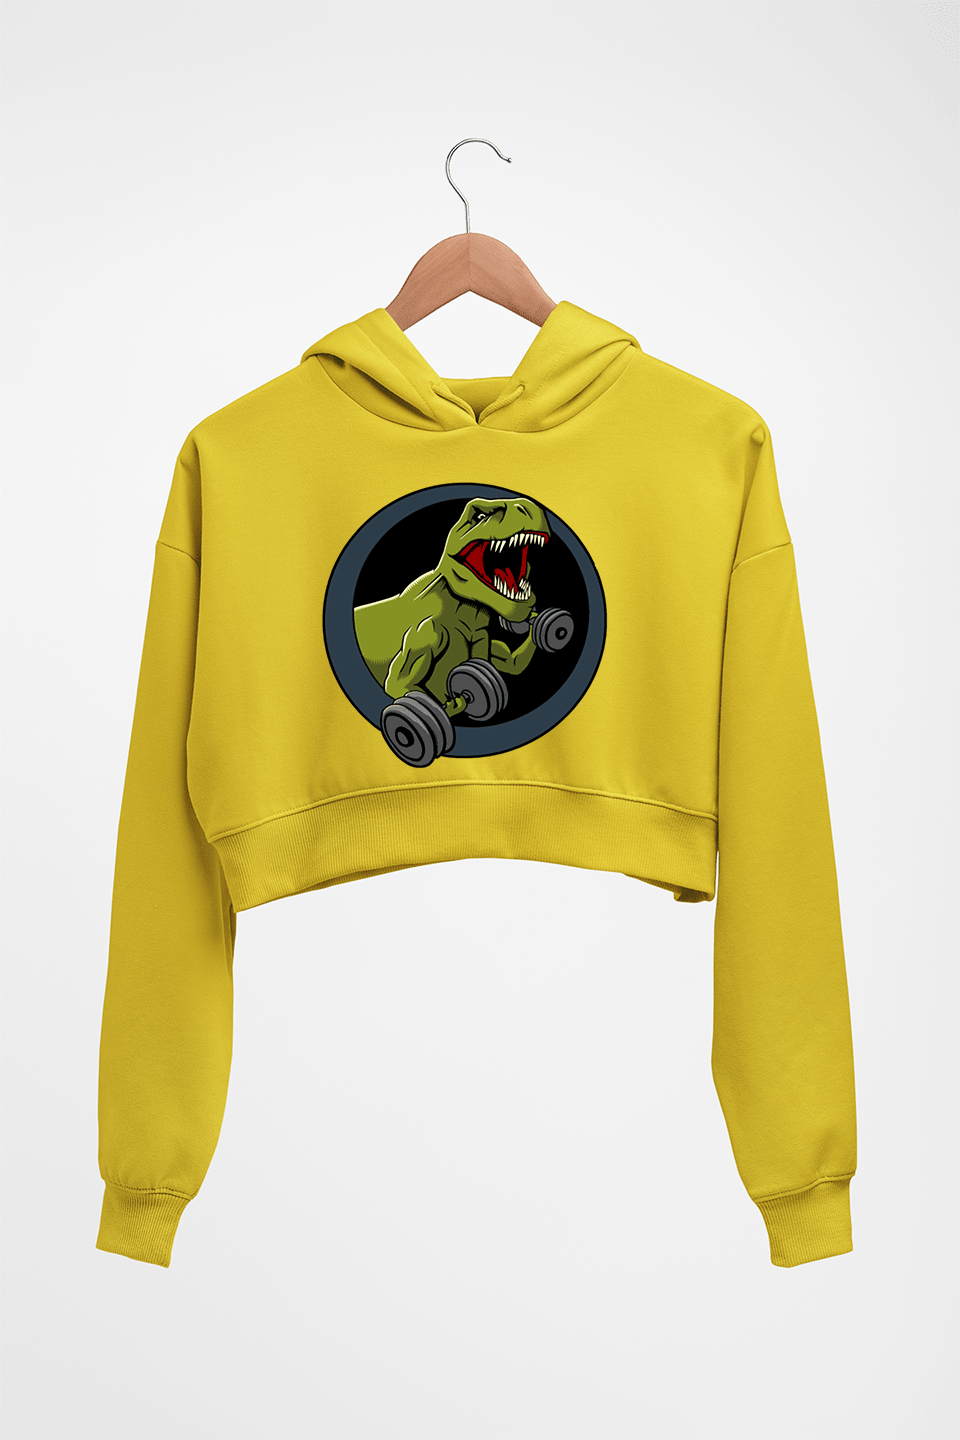 Angry T-Rex Gym Crop HOODIE FOR WOMEN